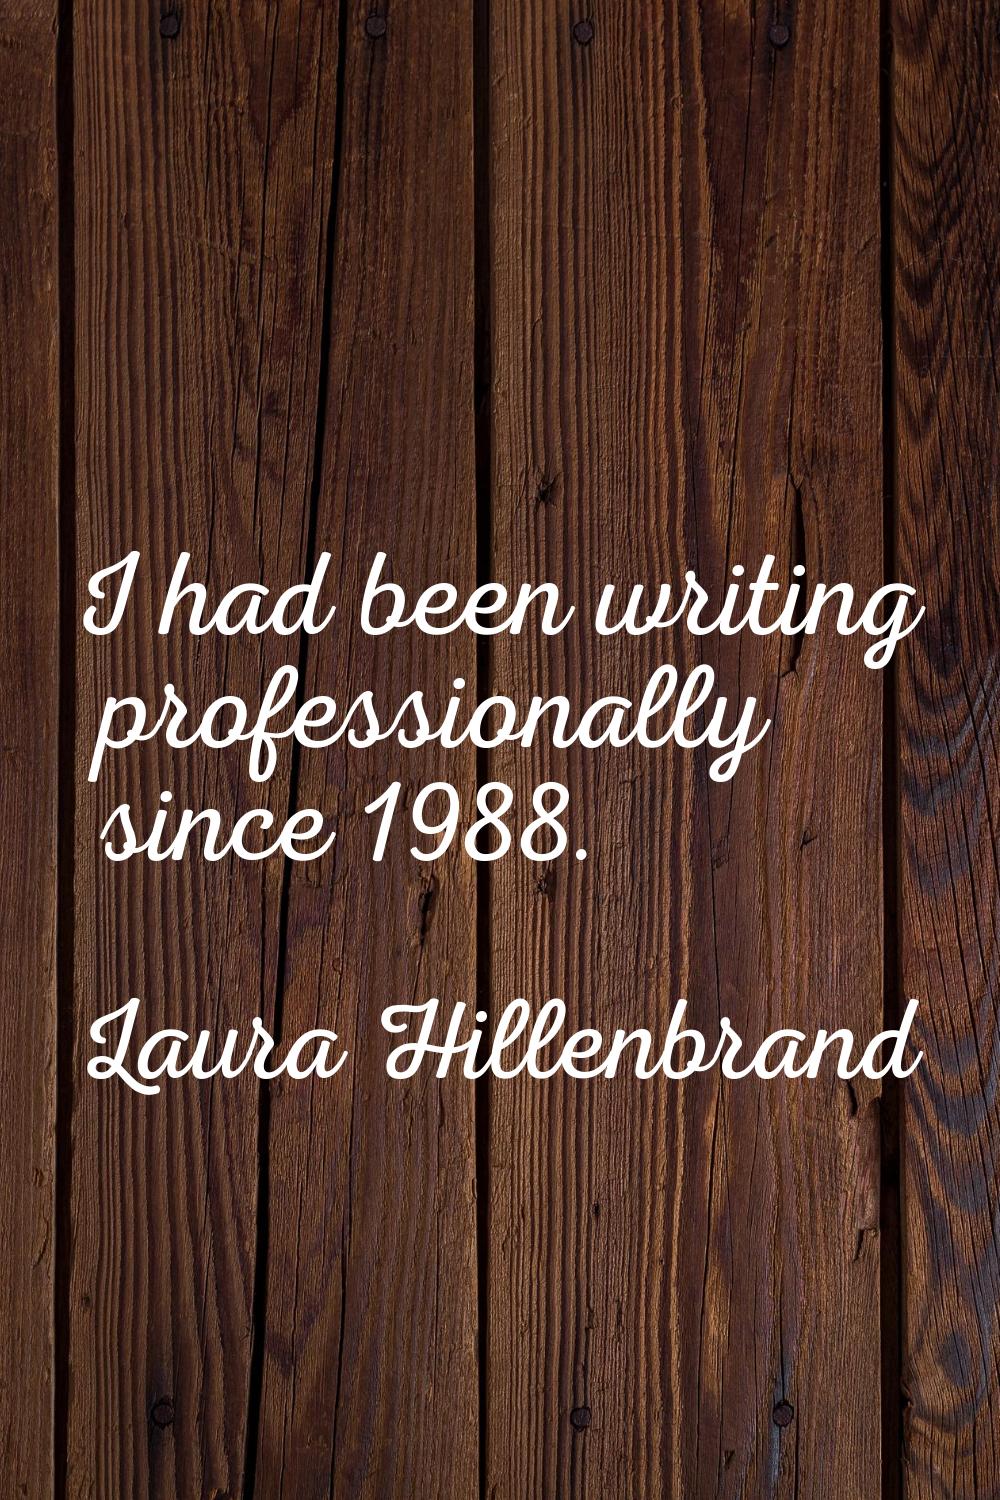 I had been writing professionally since 1988.